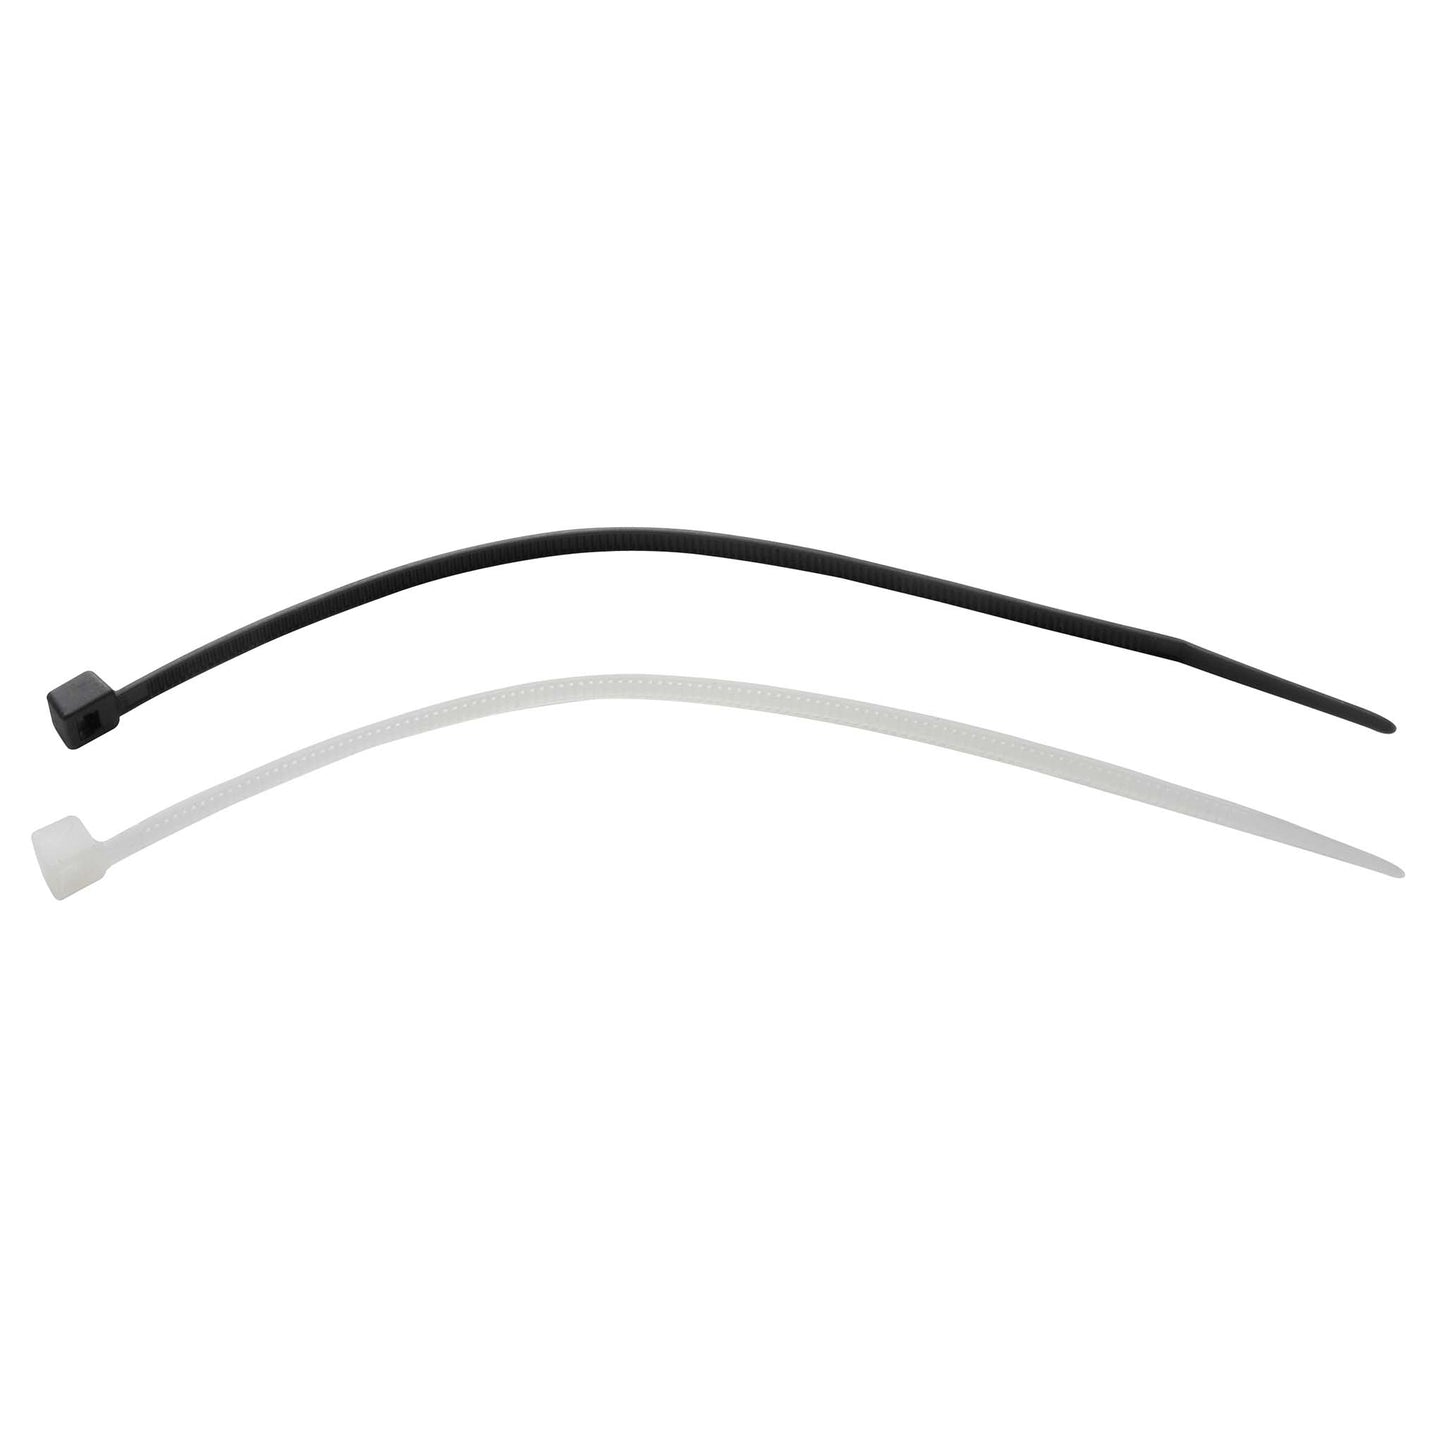 Cable ties 200 x 3.5 mm - black